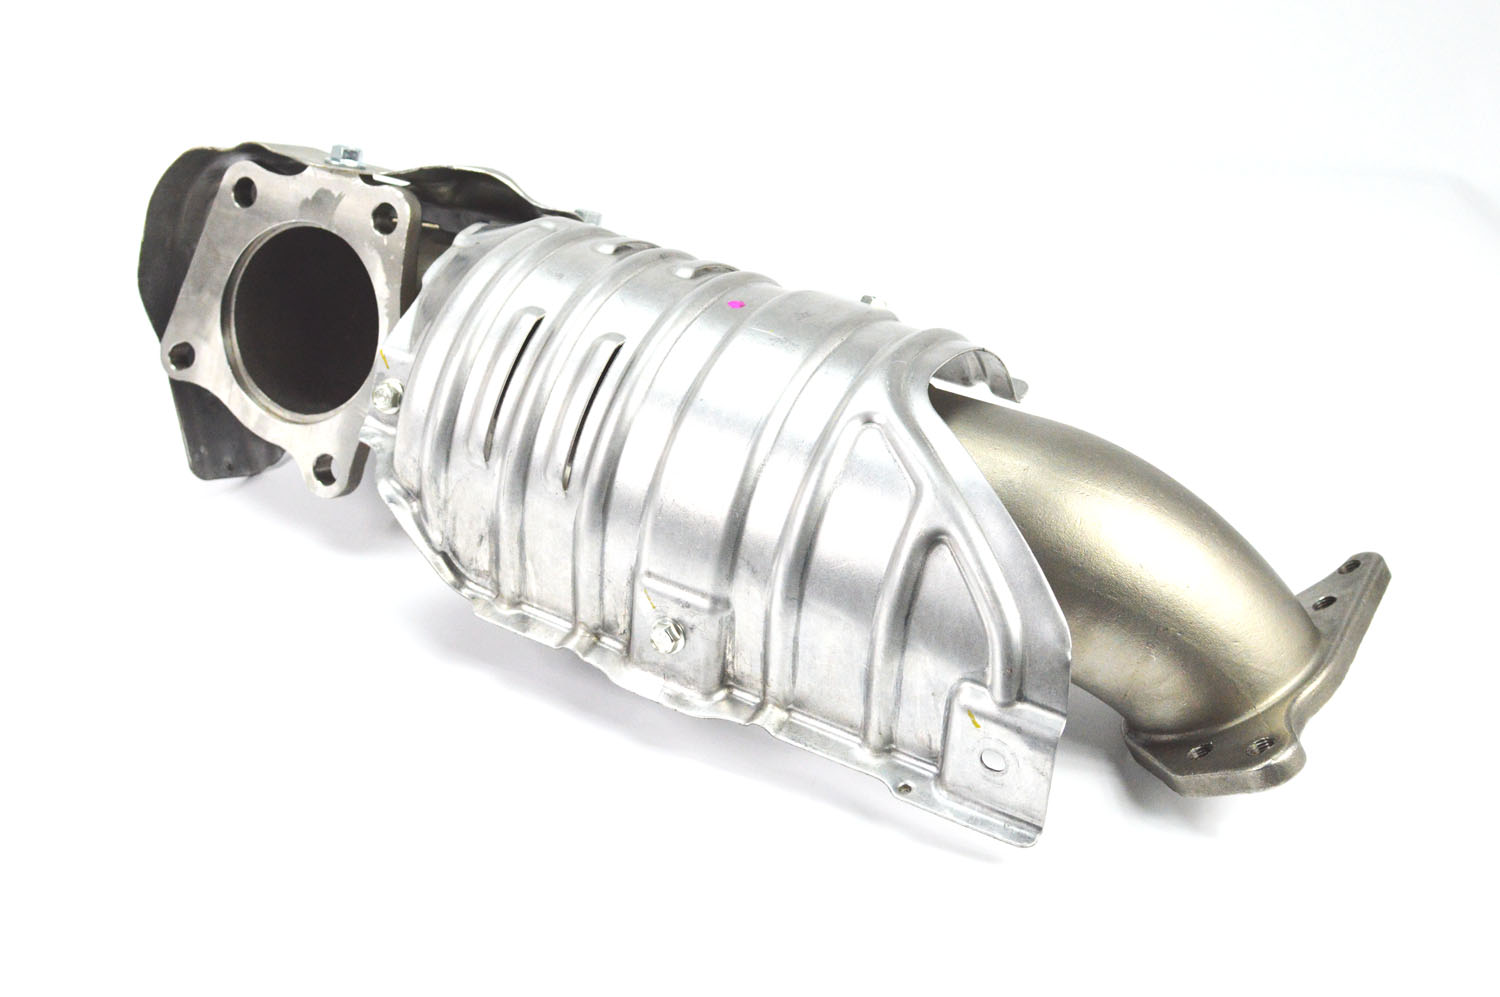 Heat Management is Key to Performance.  The 27WON Downpipe retains all factory heat shields